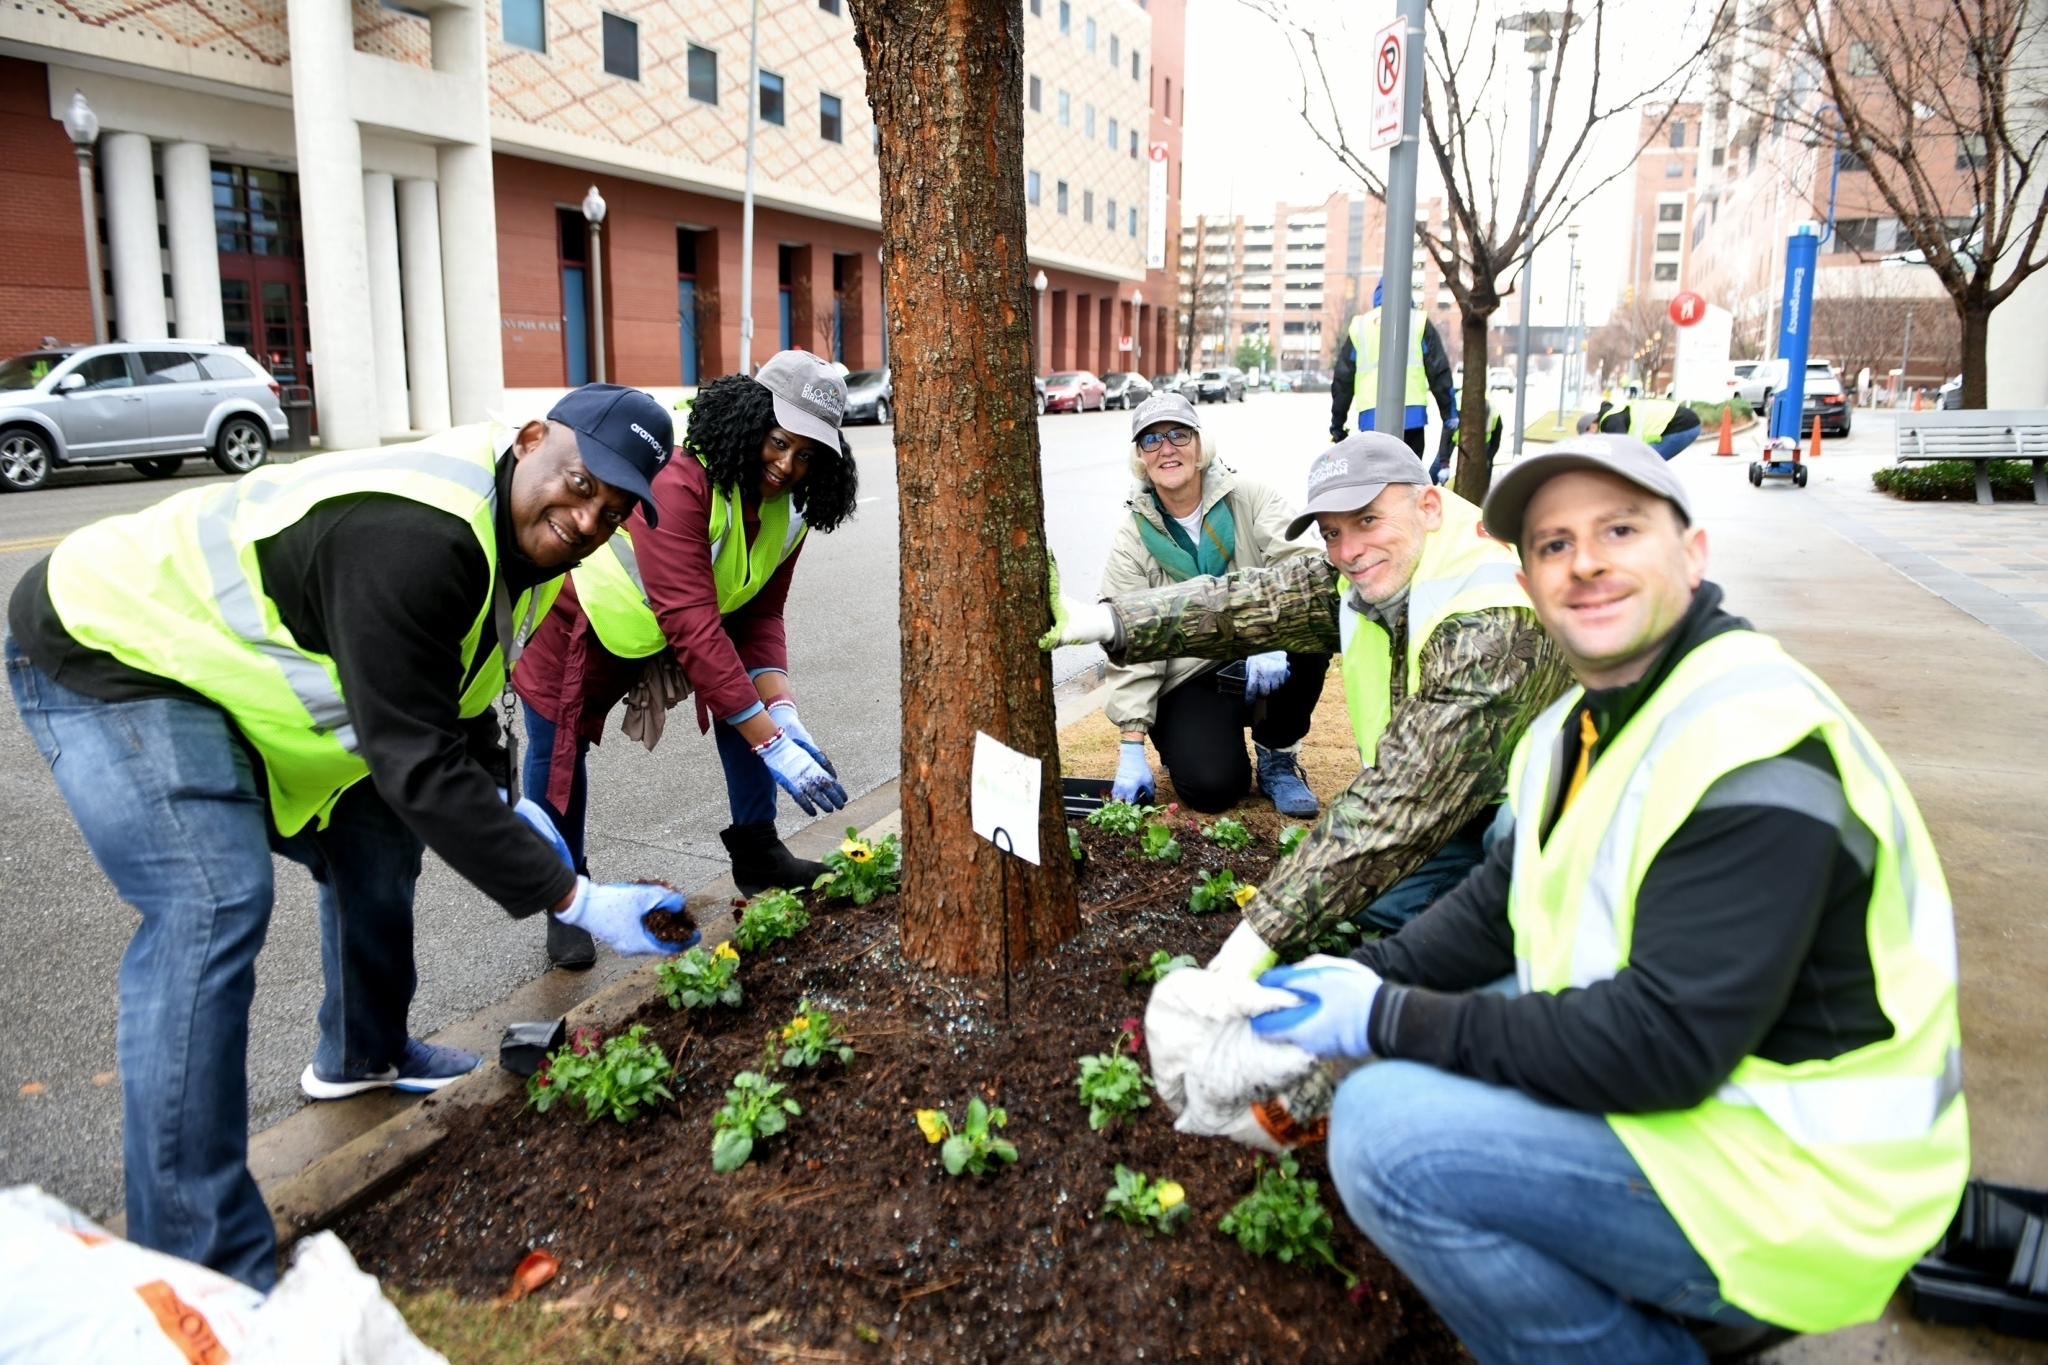 SDM 4241rs11 Blooming Birmingham: Planting 5000 flowers around Children's of Alabama and Parkside District